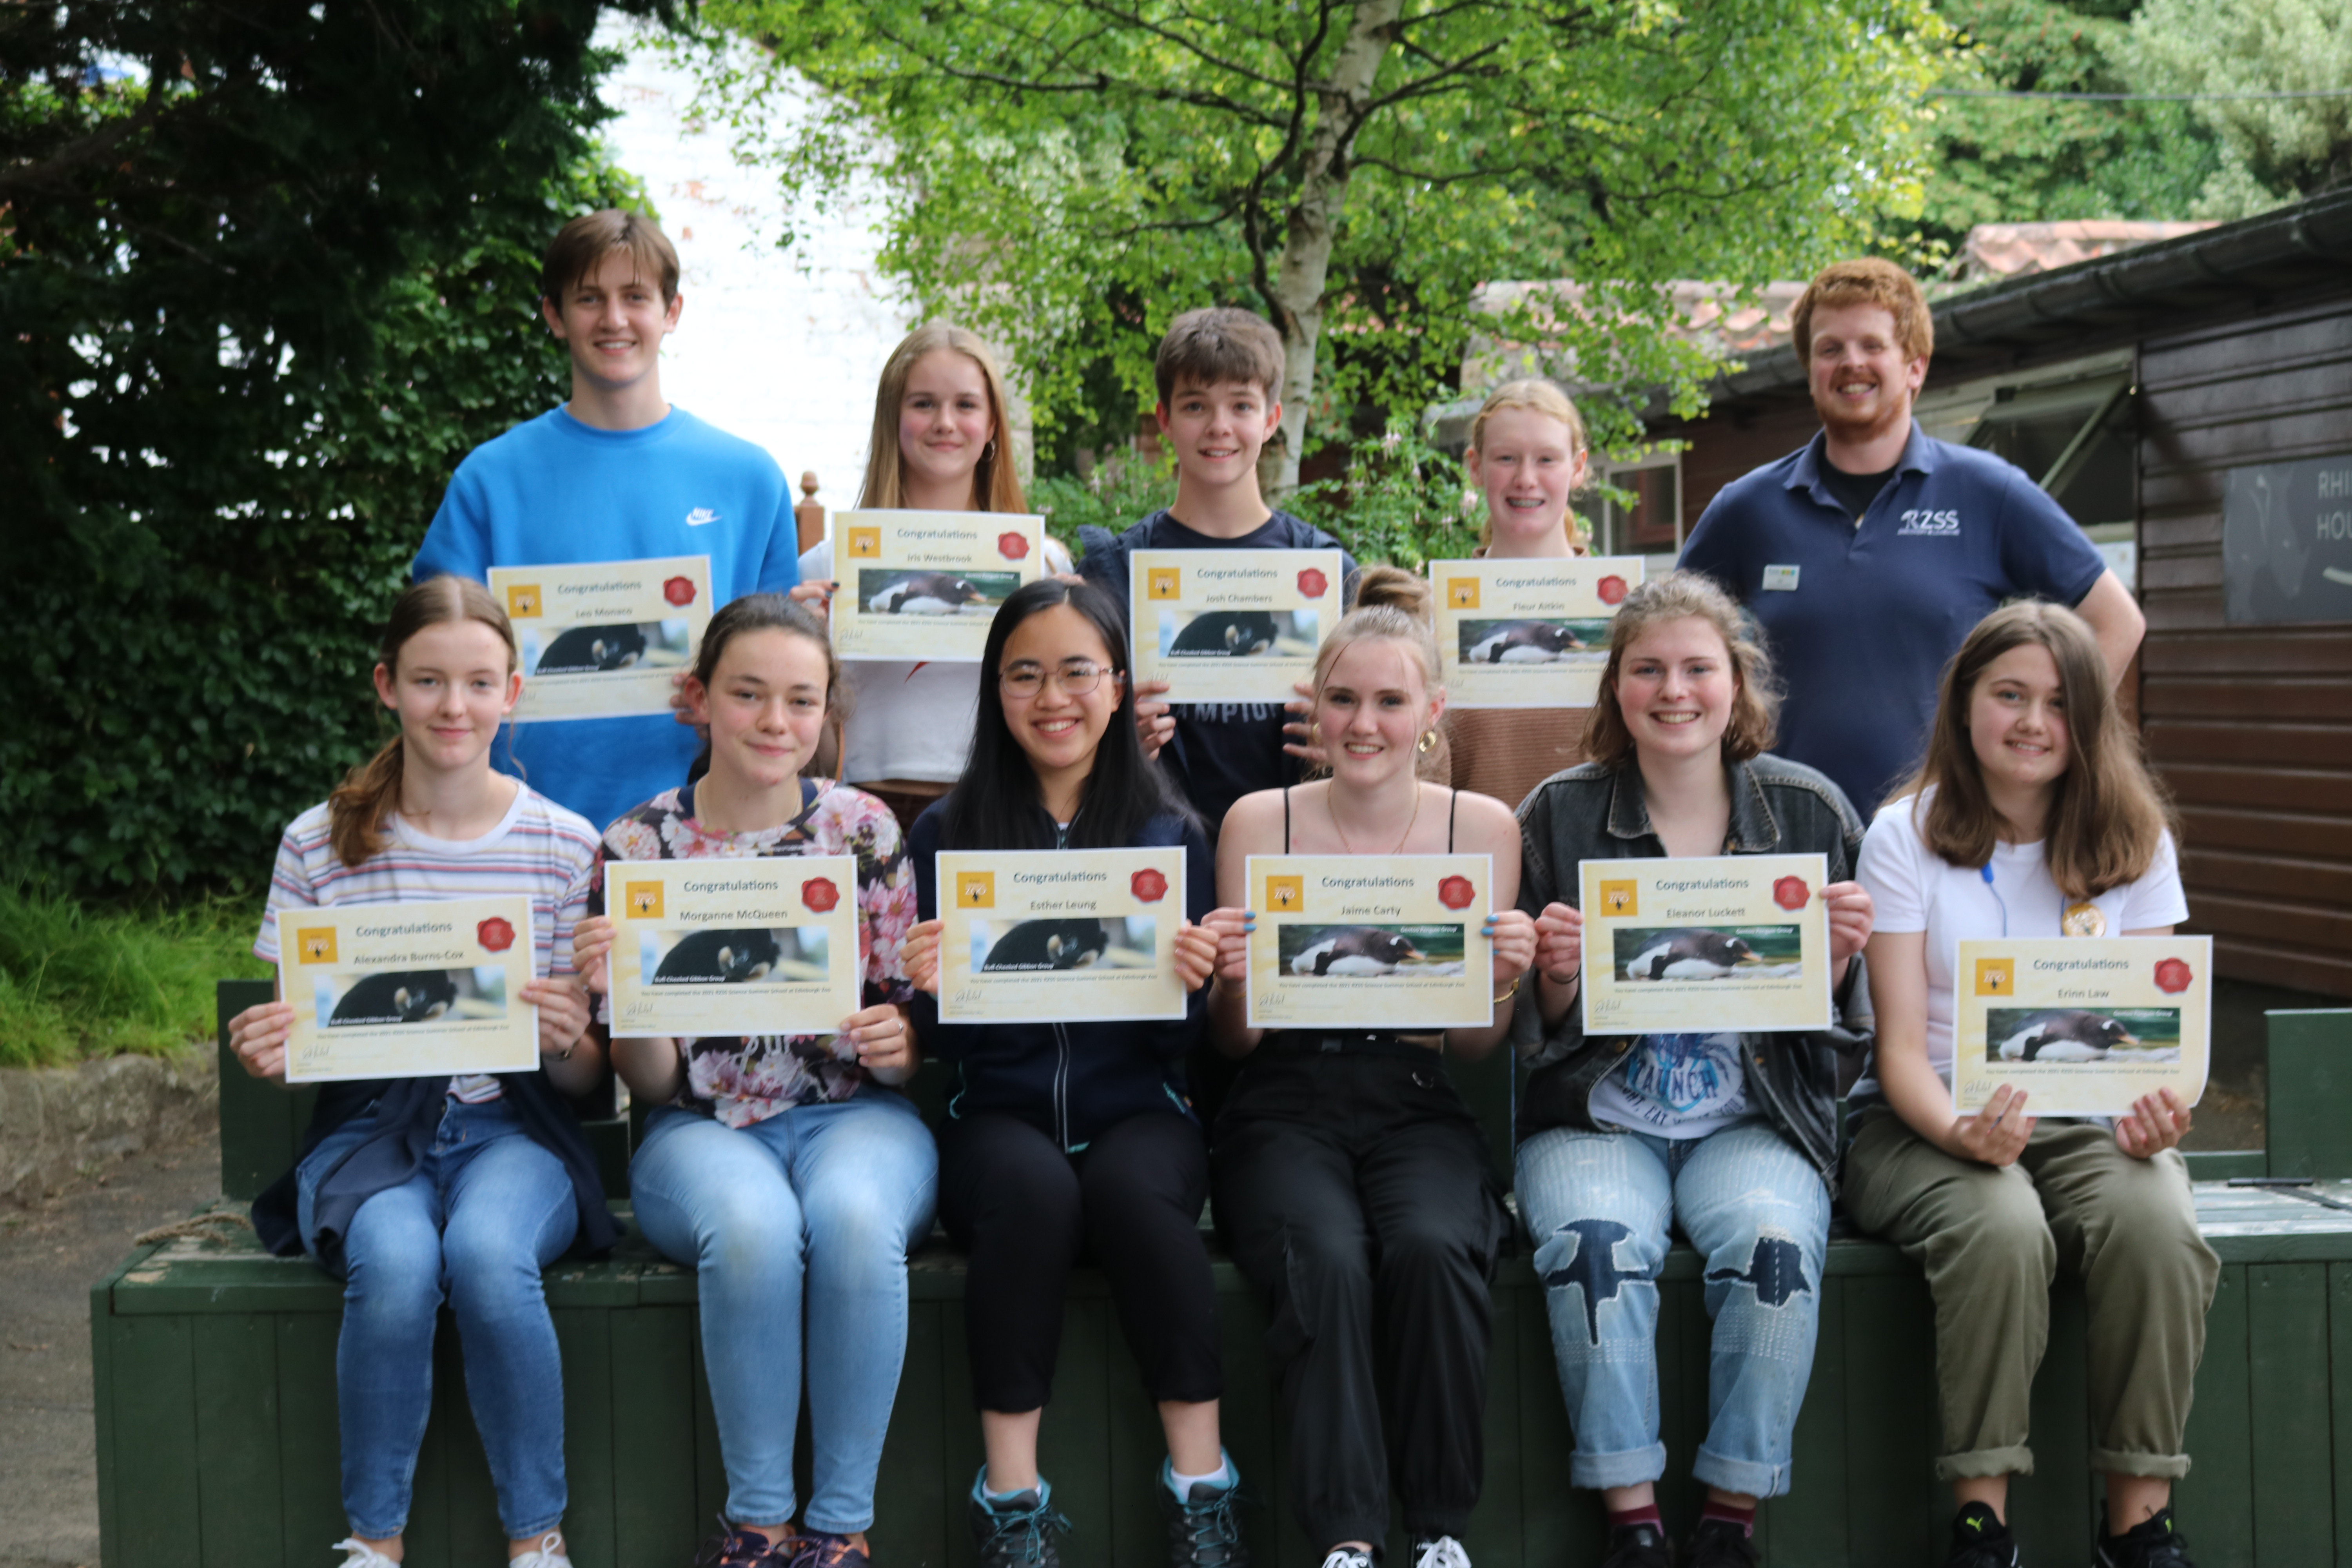 Science summer school students holding certificates